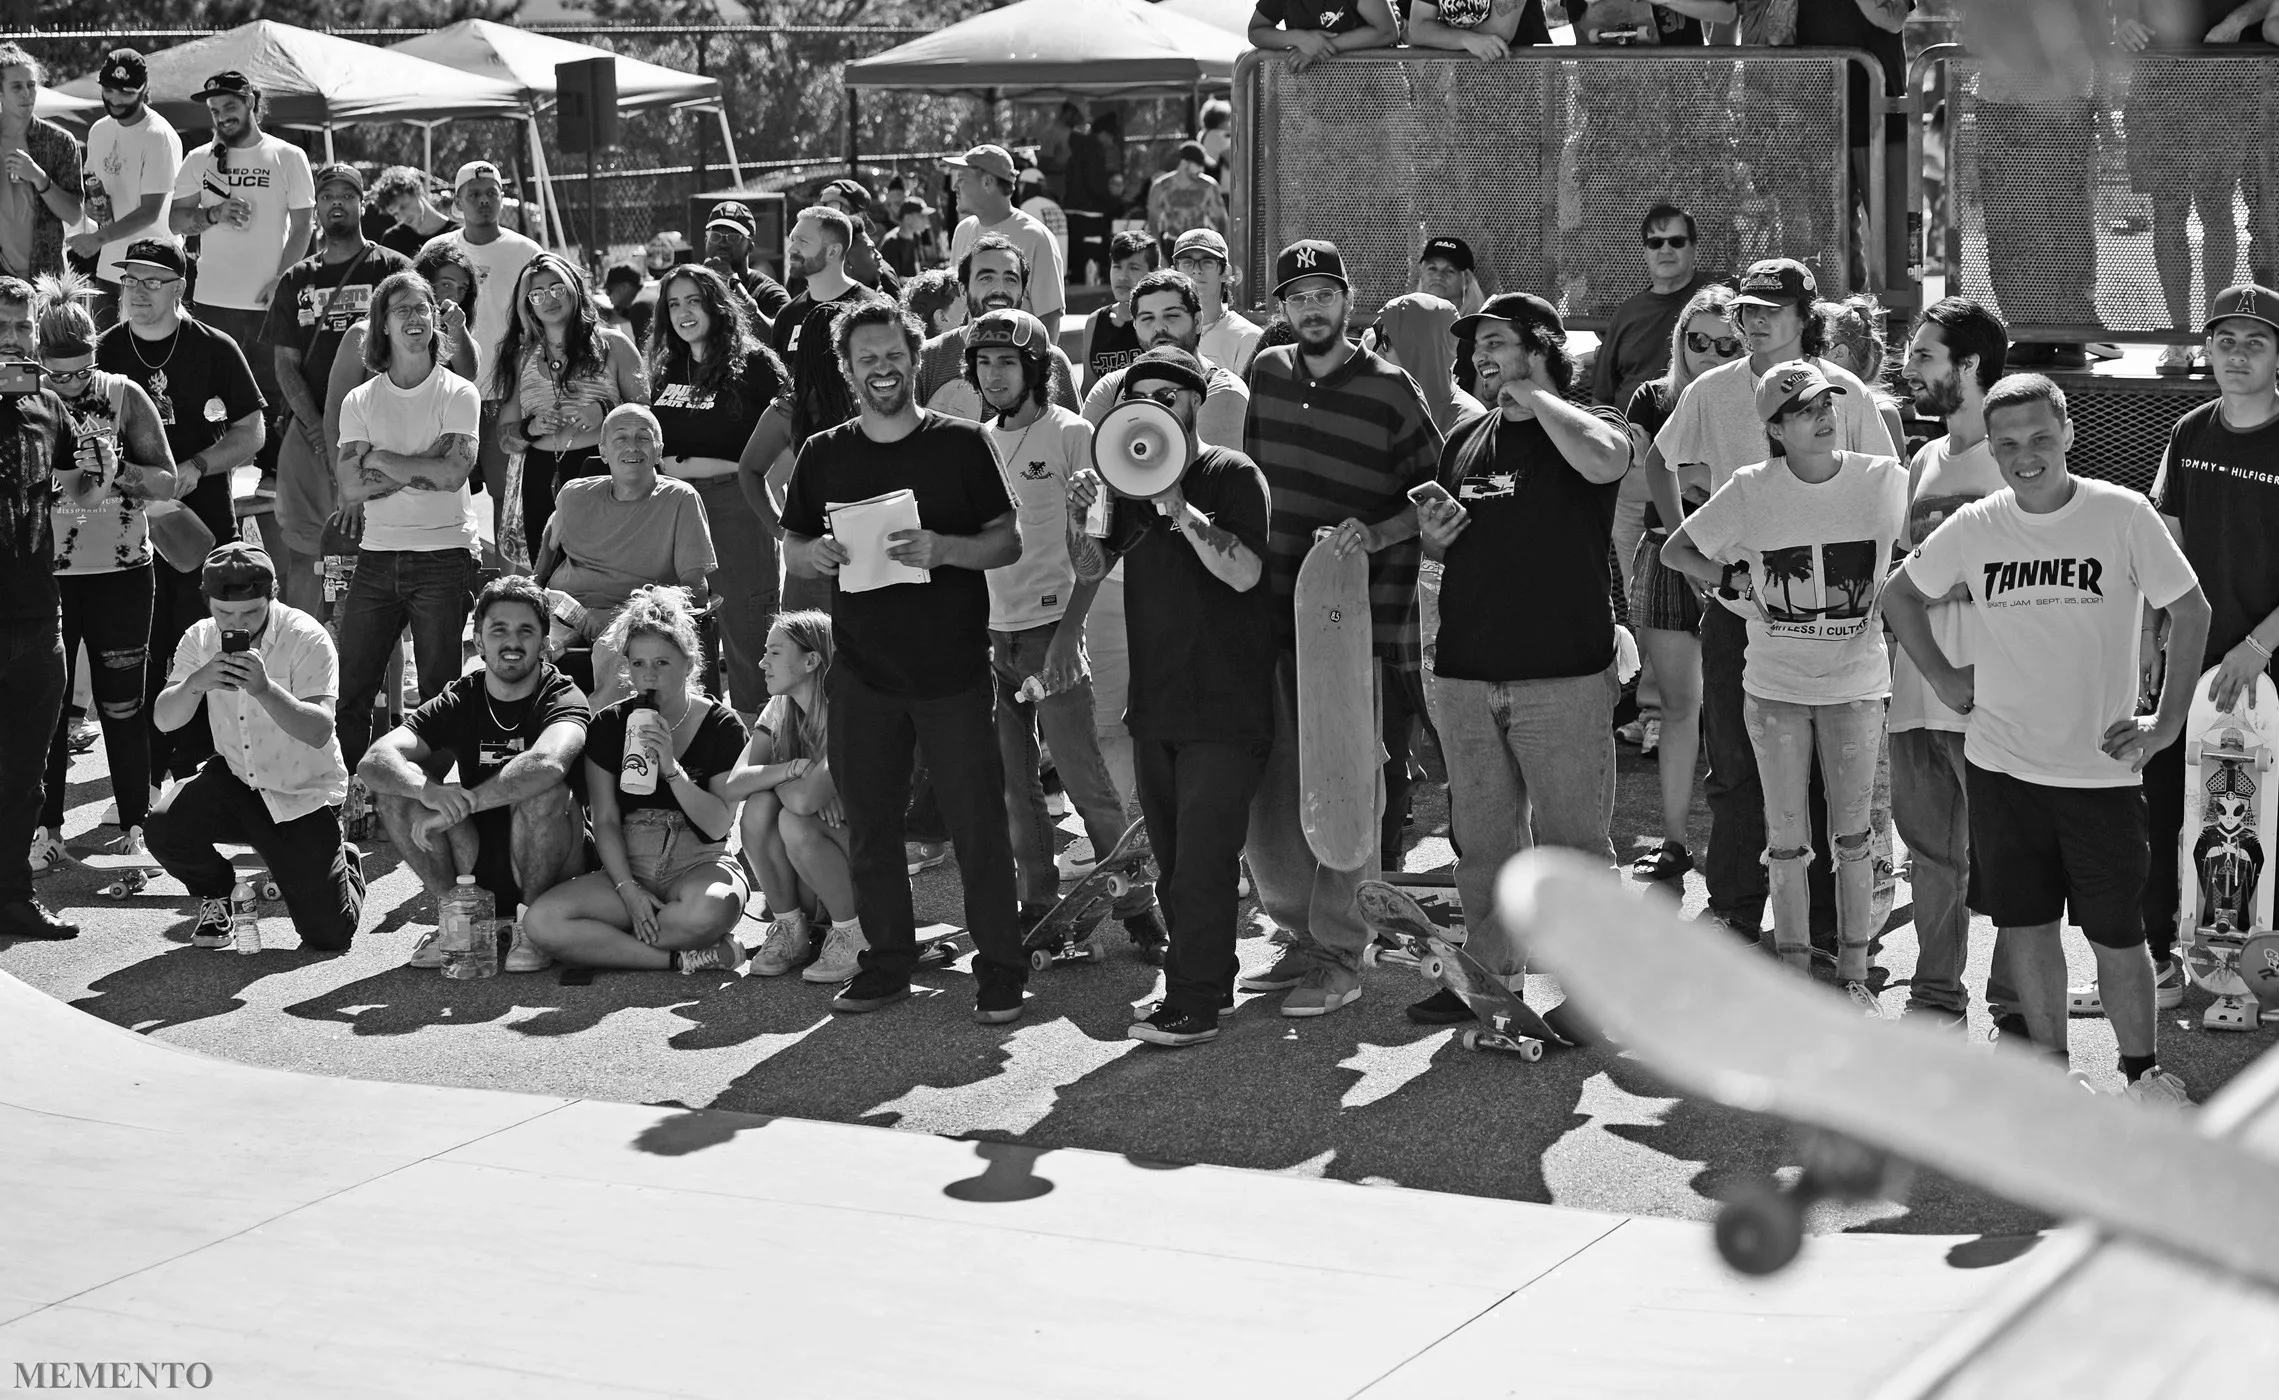 A group of people at a skatepark watching a skate competition